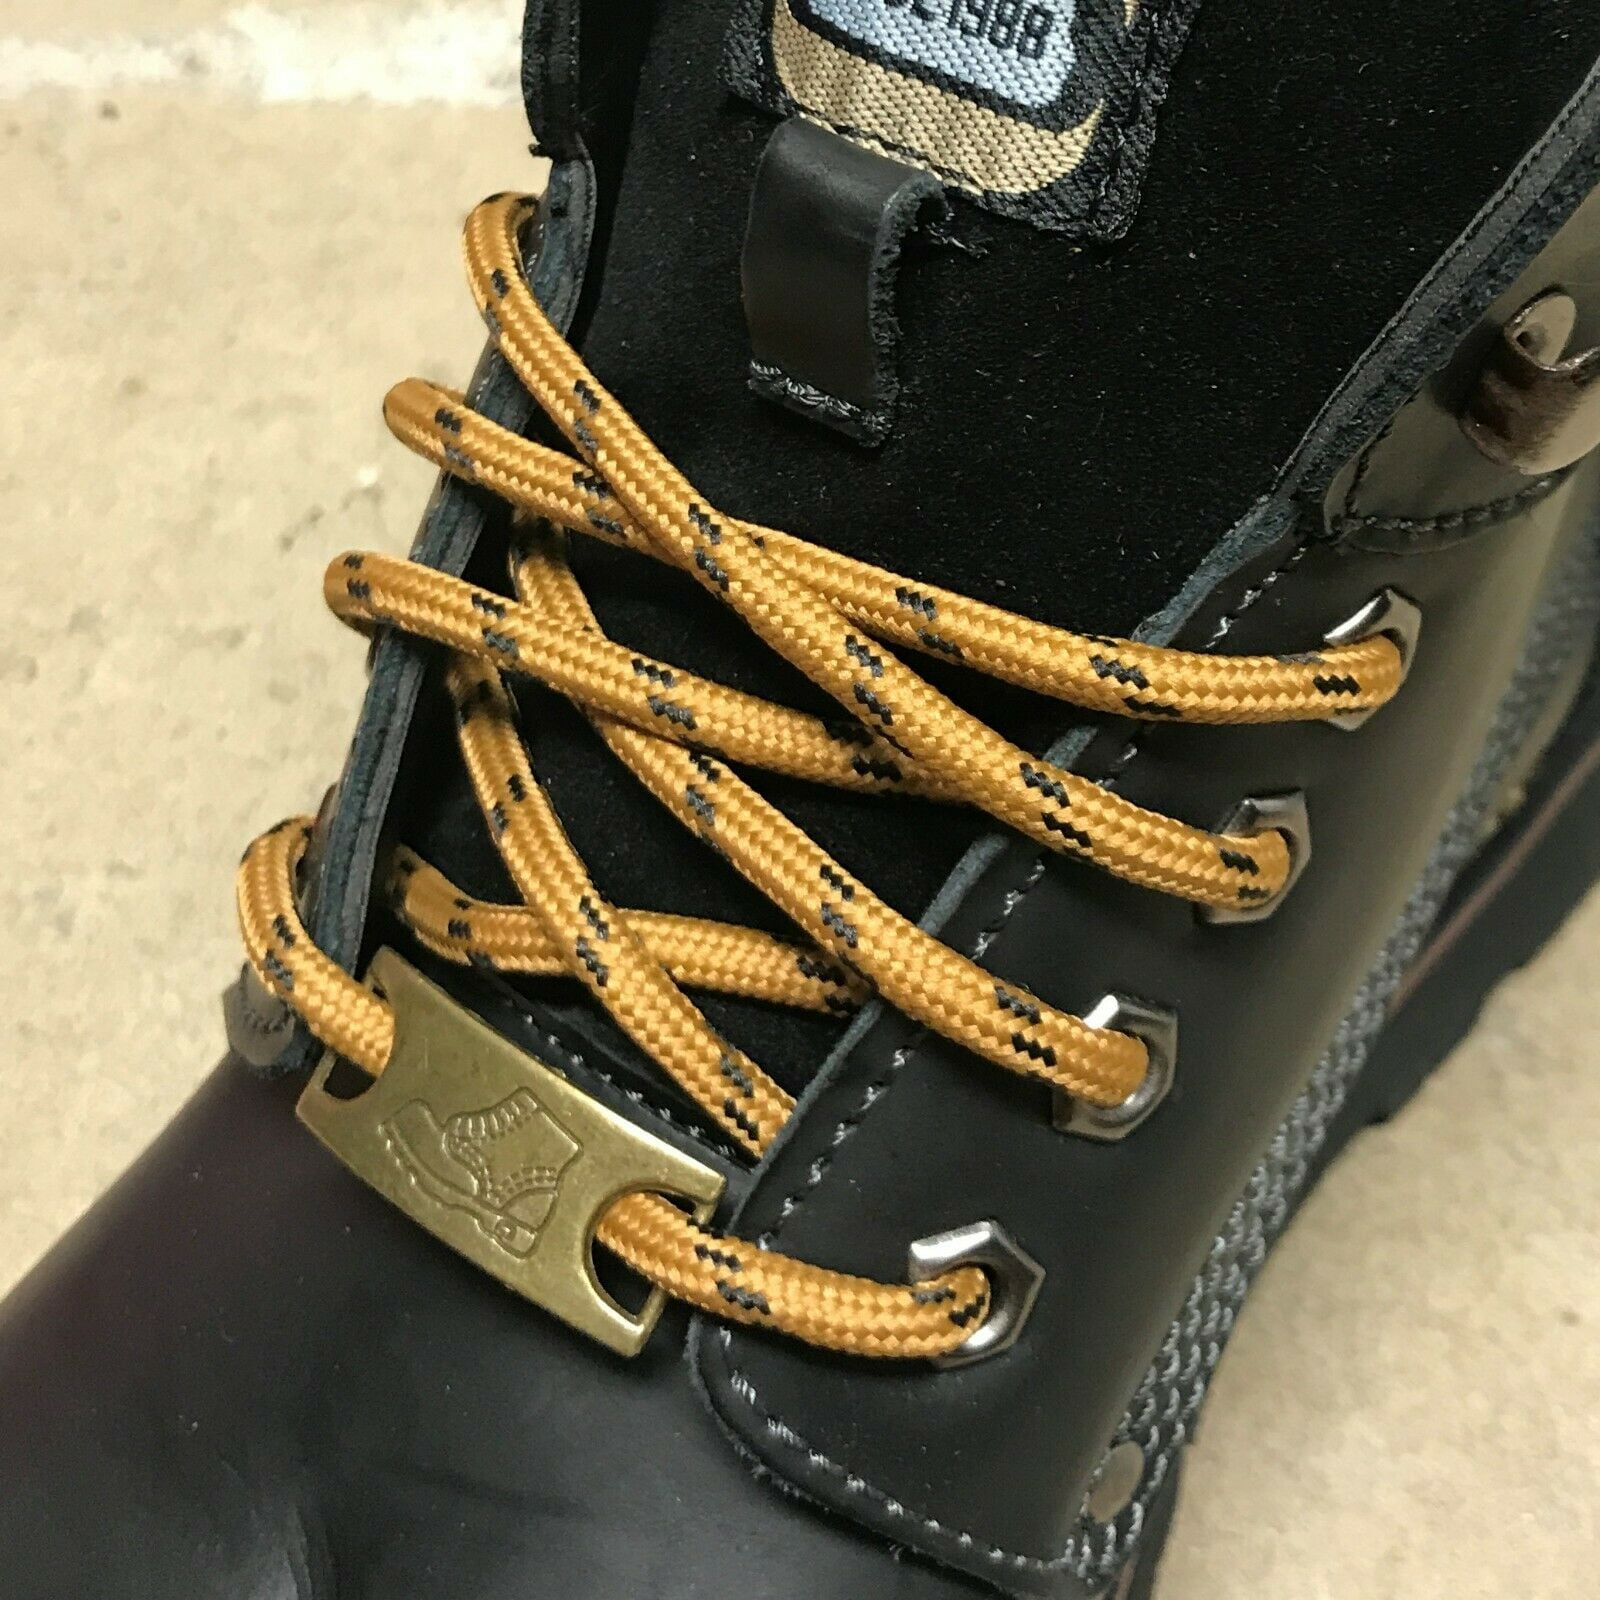 2 pairs 5mm Thick Heavy duty Round Hiking Work Boot Shoe laces Strings Men Women 